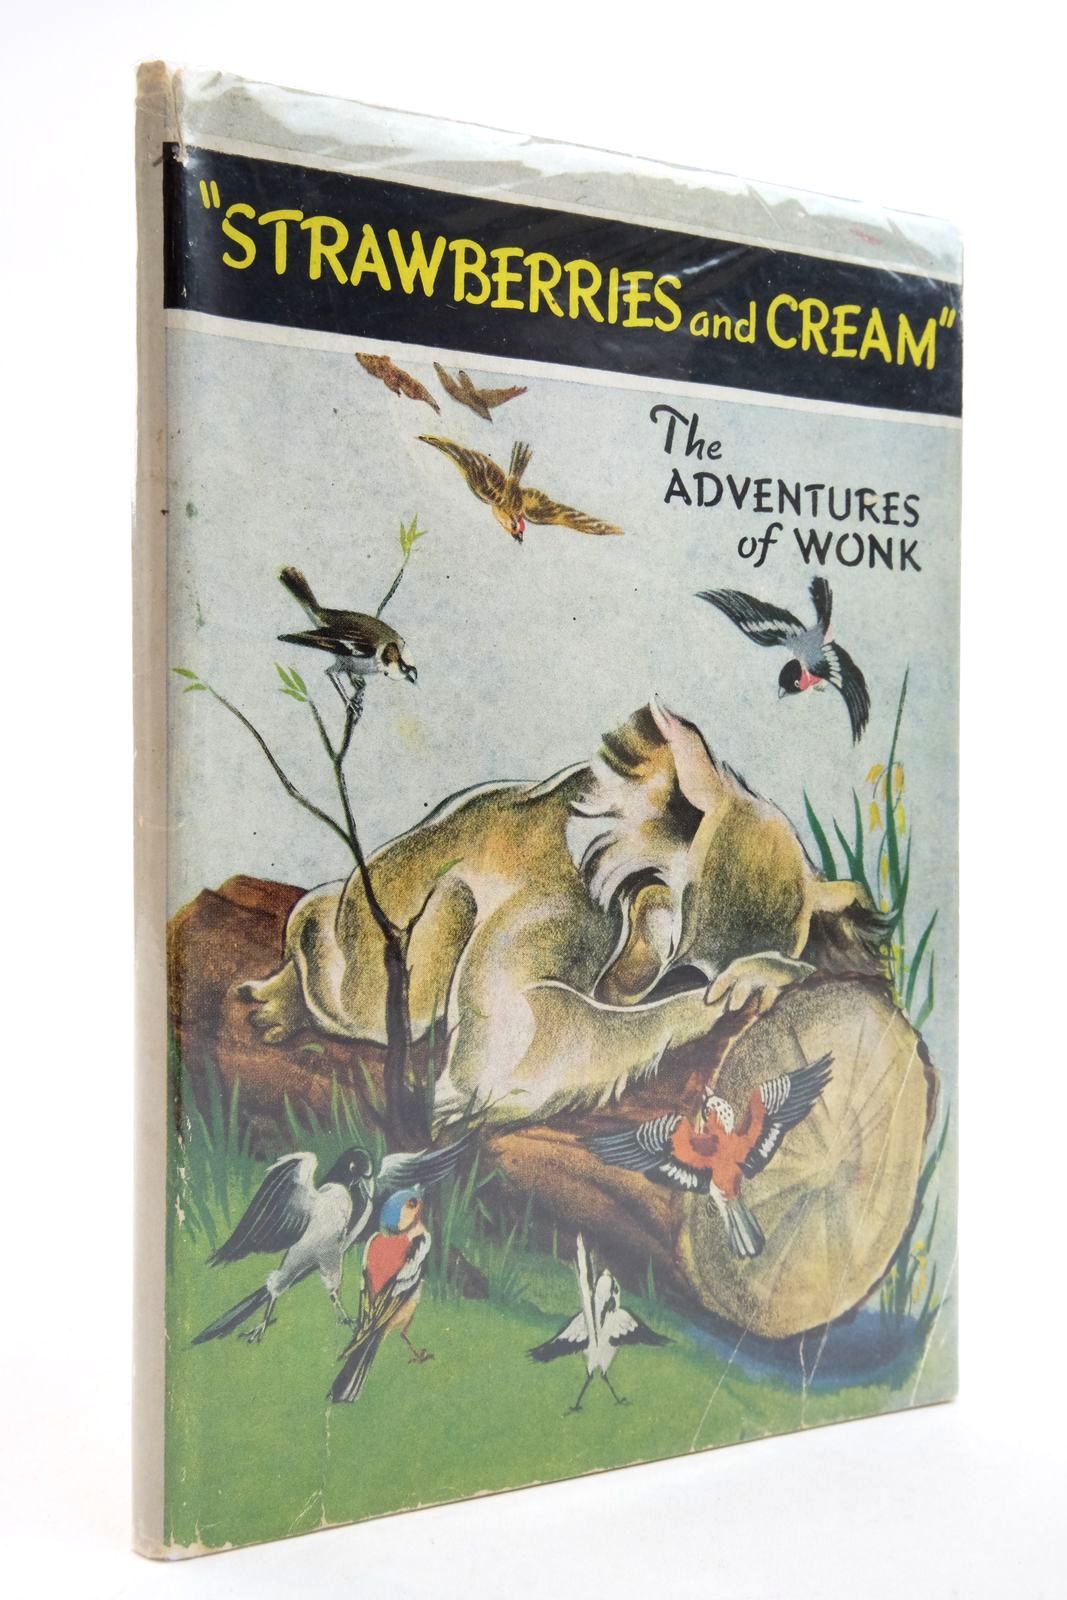 Photo of THE ADVENTURES OF WONK - STRAWBERRIES AND CREAM written by Levy, Muriel illustrated by Kiddell-Monroe, Joan published by Wills &amp; Hepworth Ltd. (STOCK CODE: 2136918)  for sale by Stella & Rose's Books